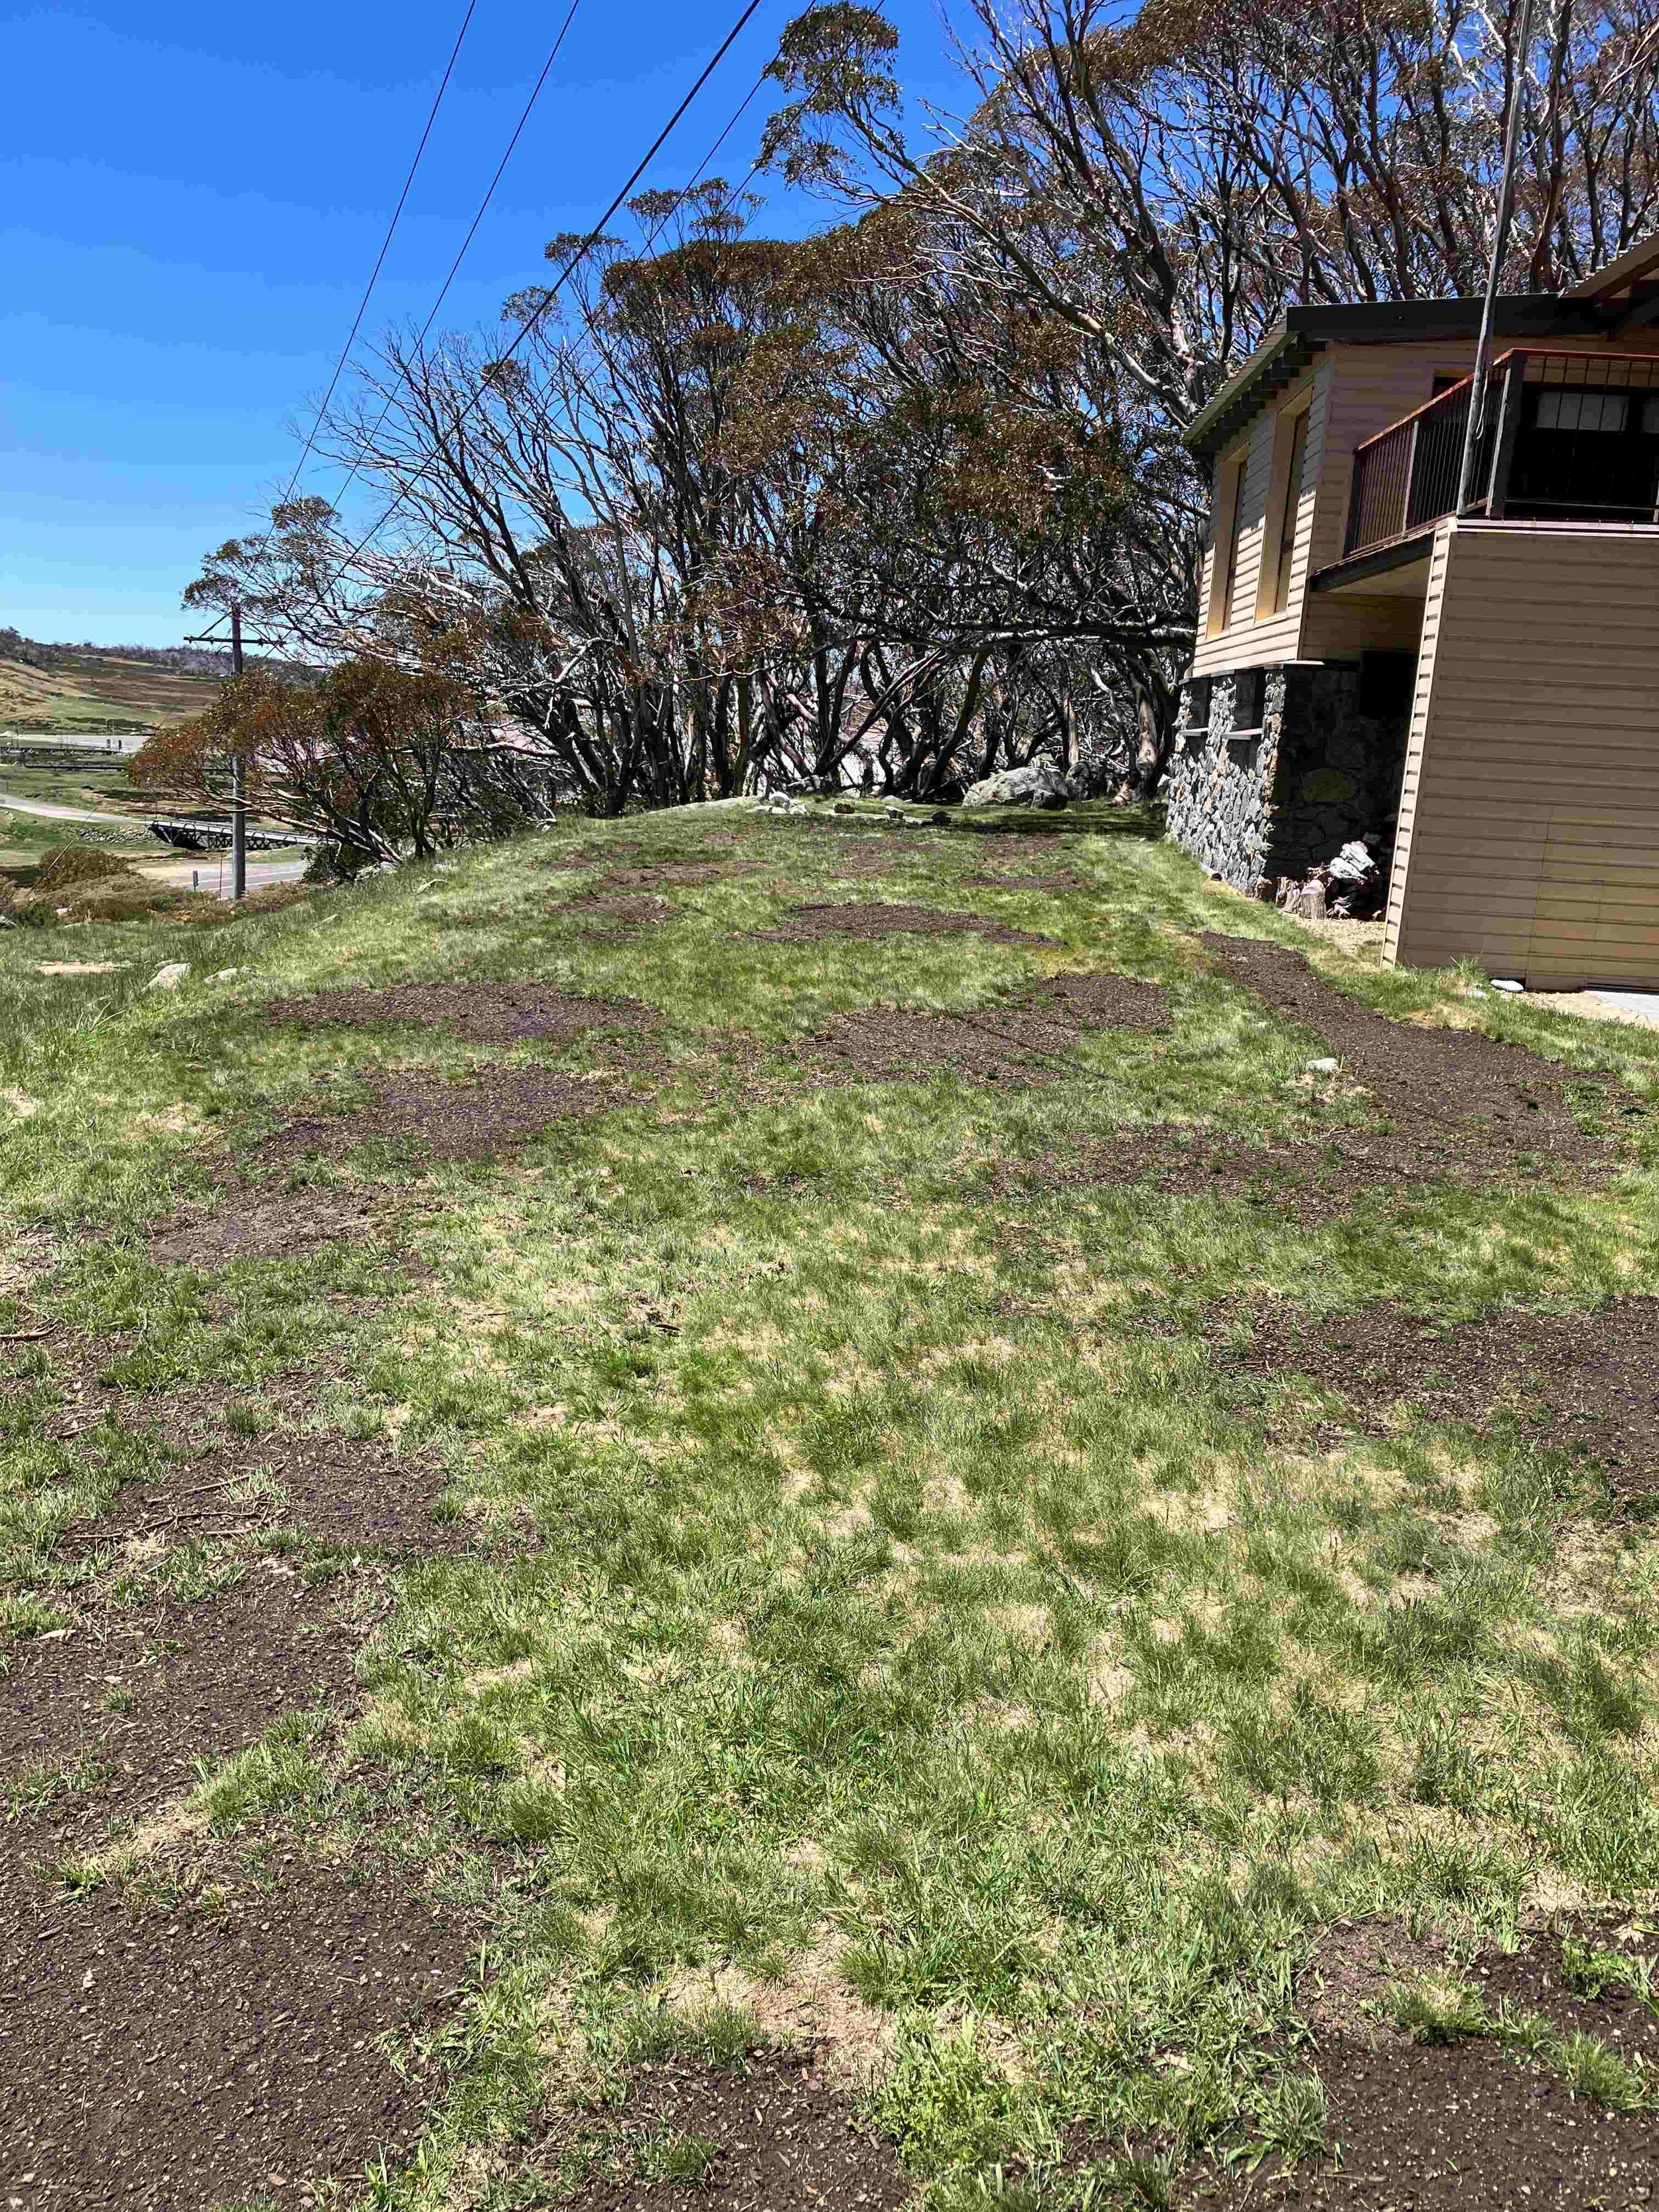  Lower lawn area after seed spreading 